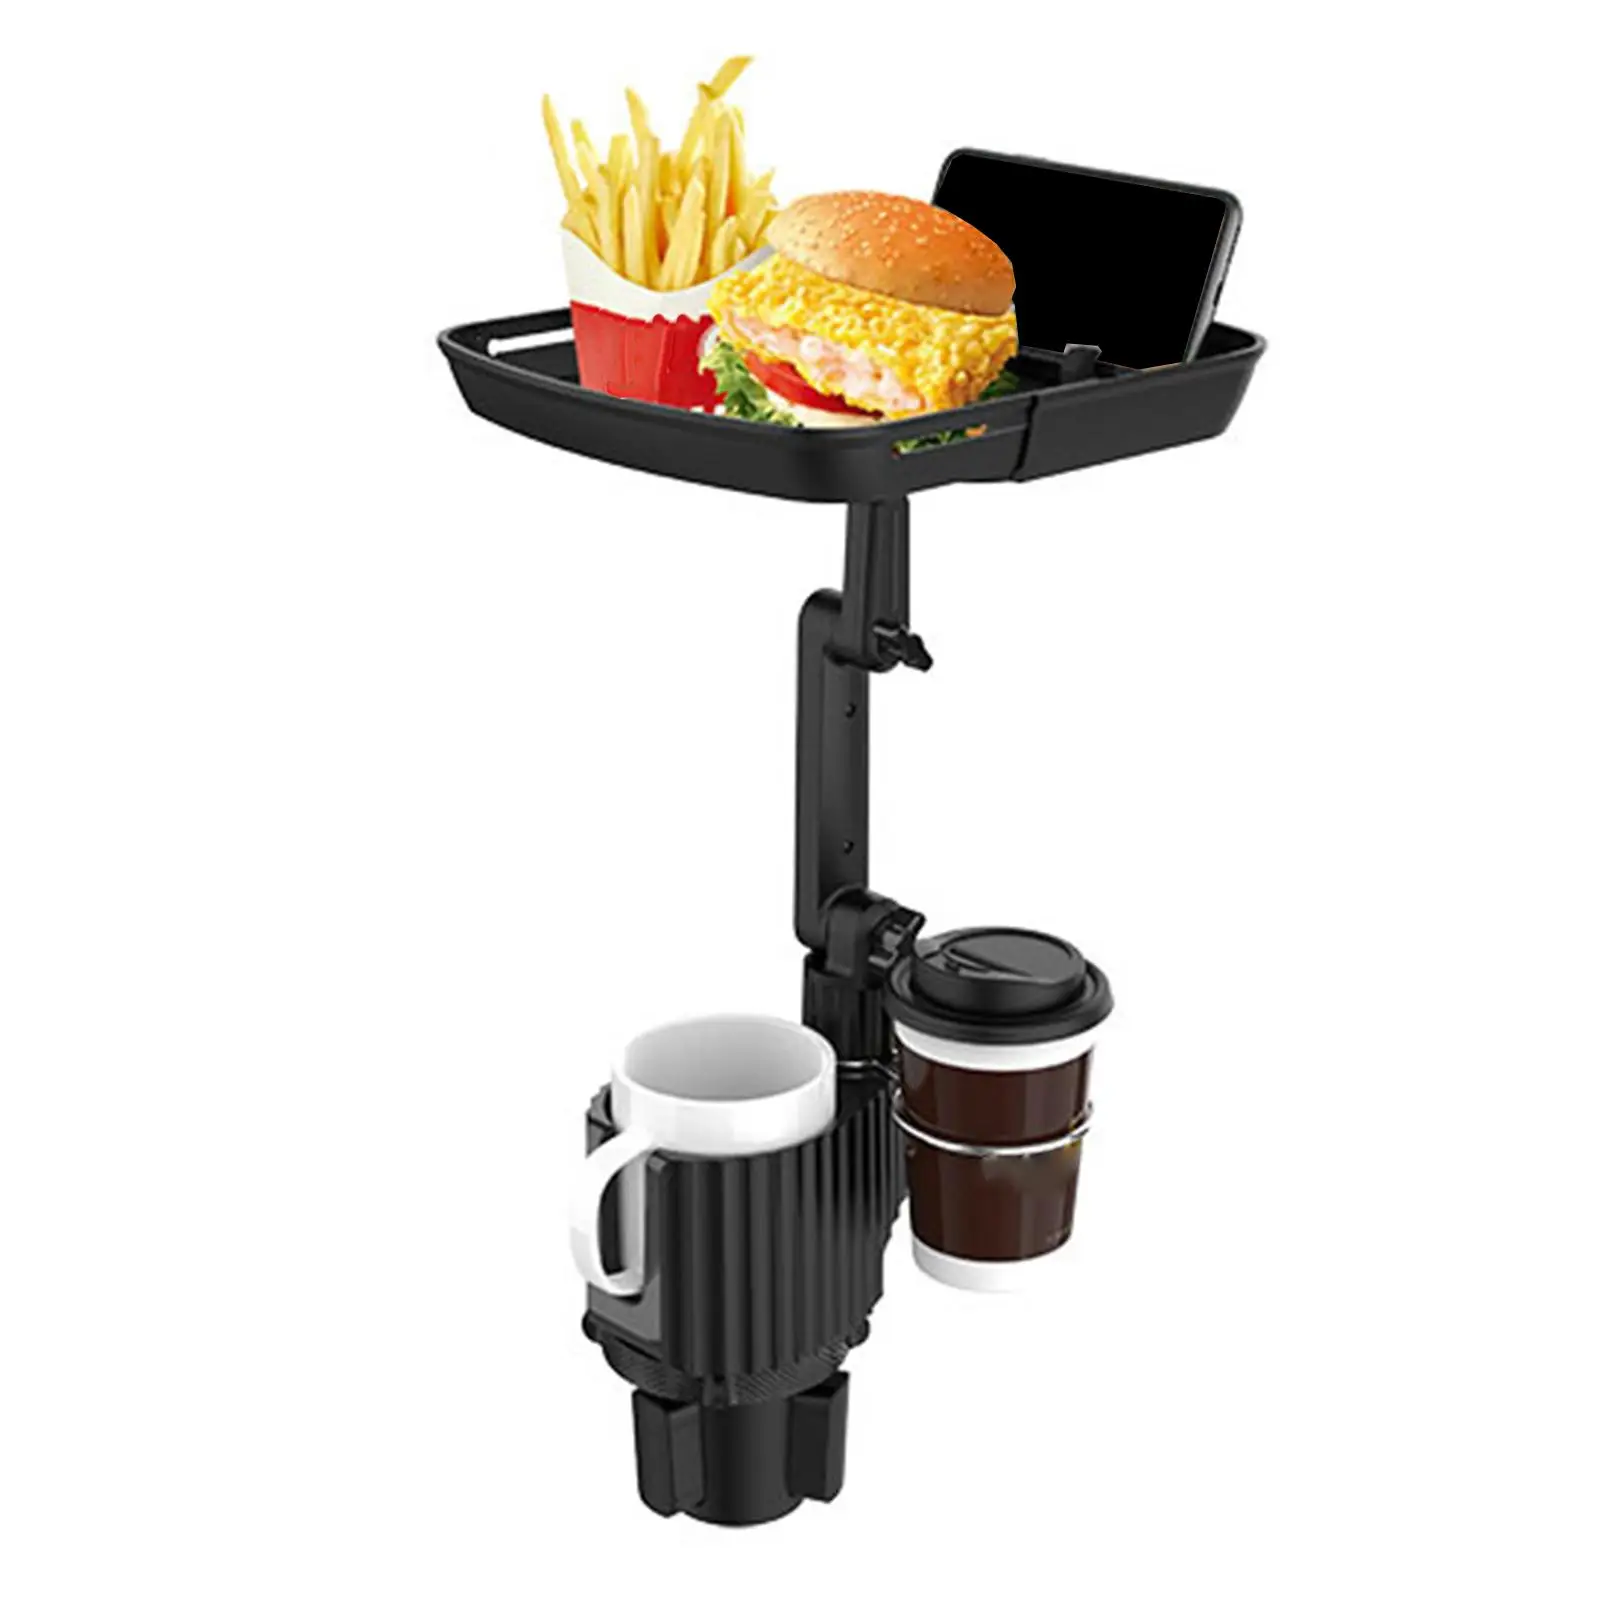 Car  Cup Holders with Mobile Phone Slot for Snacks, Food, Fruits, , Drinks, Keys